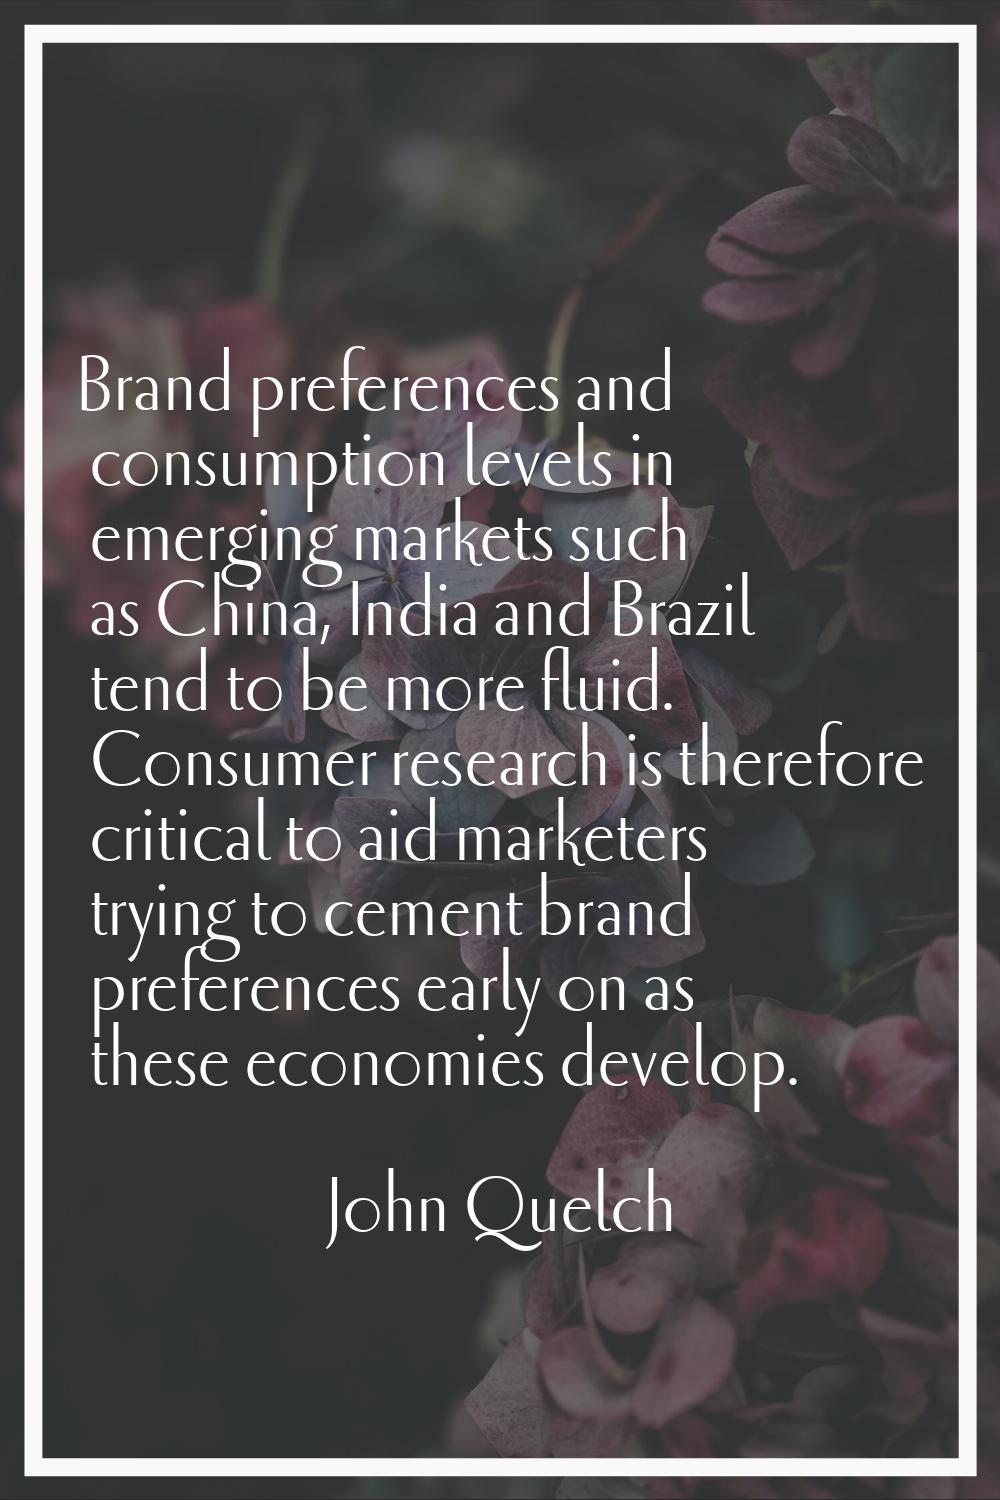 Brand preferences and consumption levels in emerging markets such as China, India and Brazil tend t